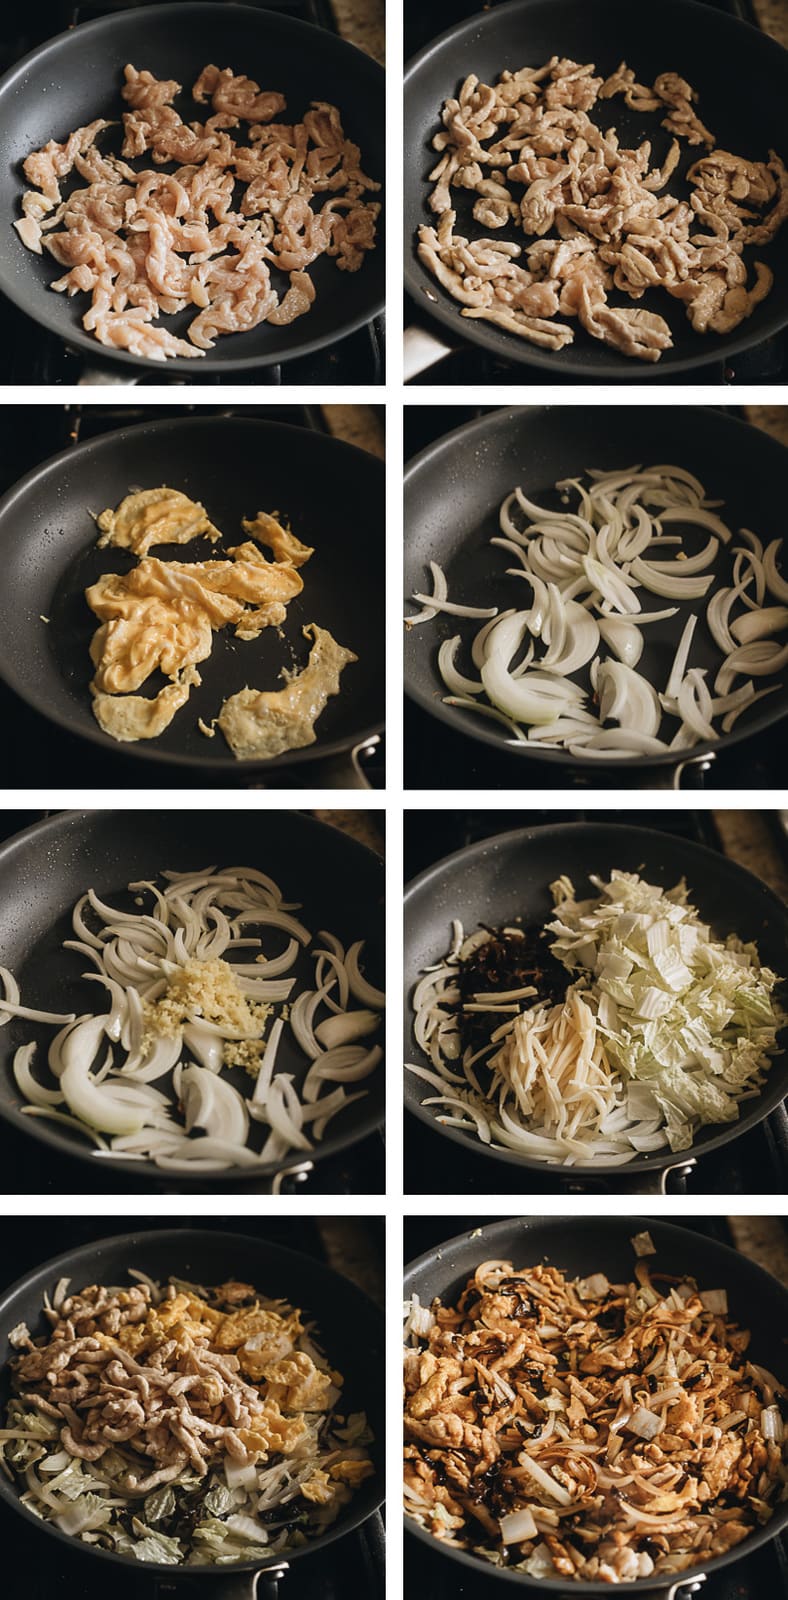 Moo shu chicken cooking step-by-step